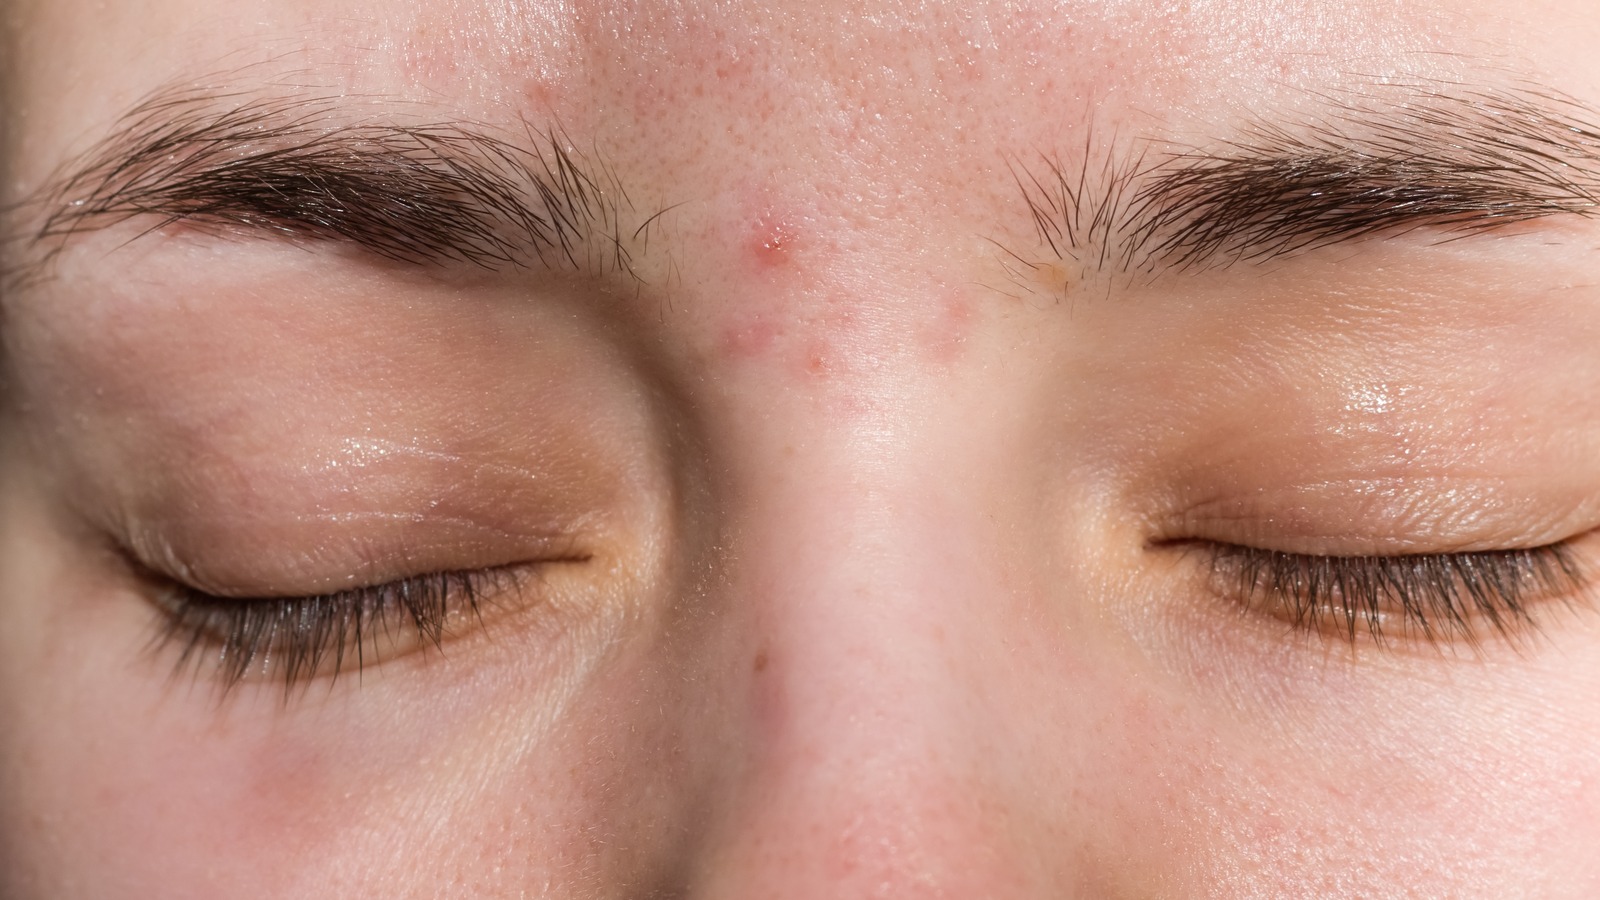 What's Causing Acne Between Your Eyebrows And How Do You Get Rid Of It?